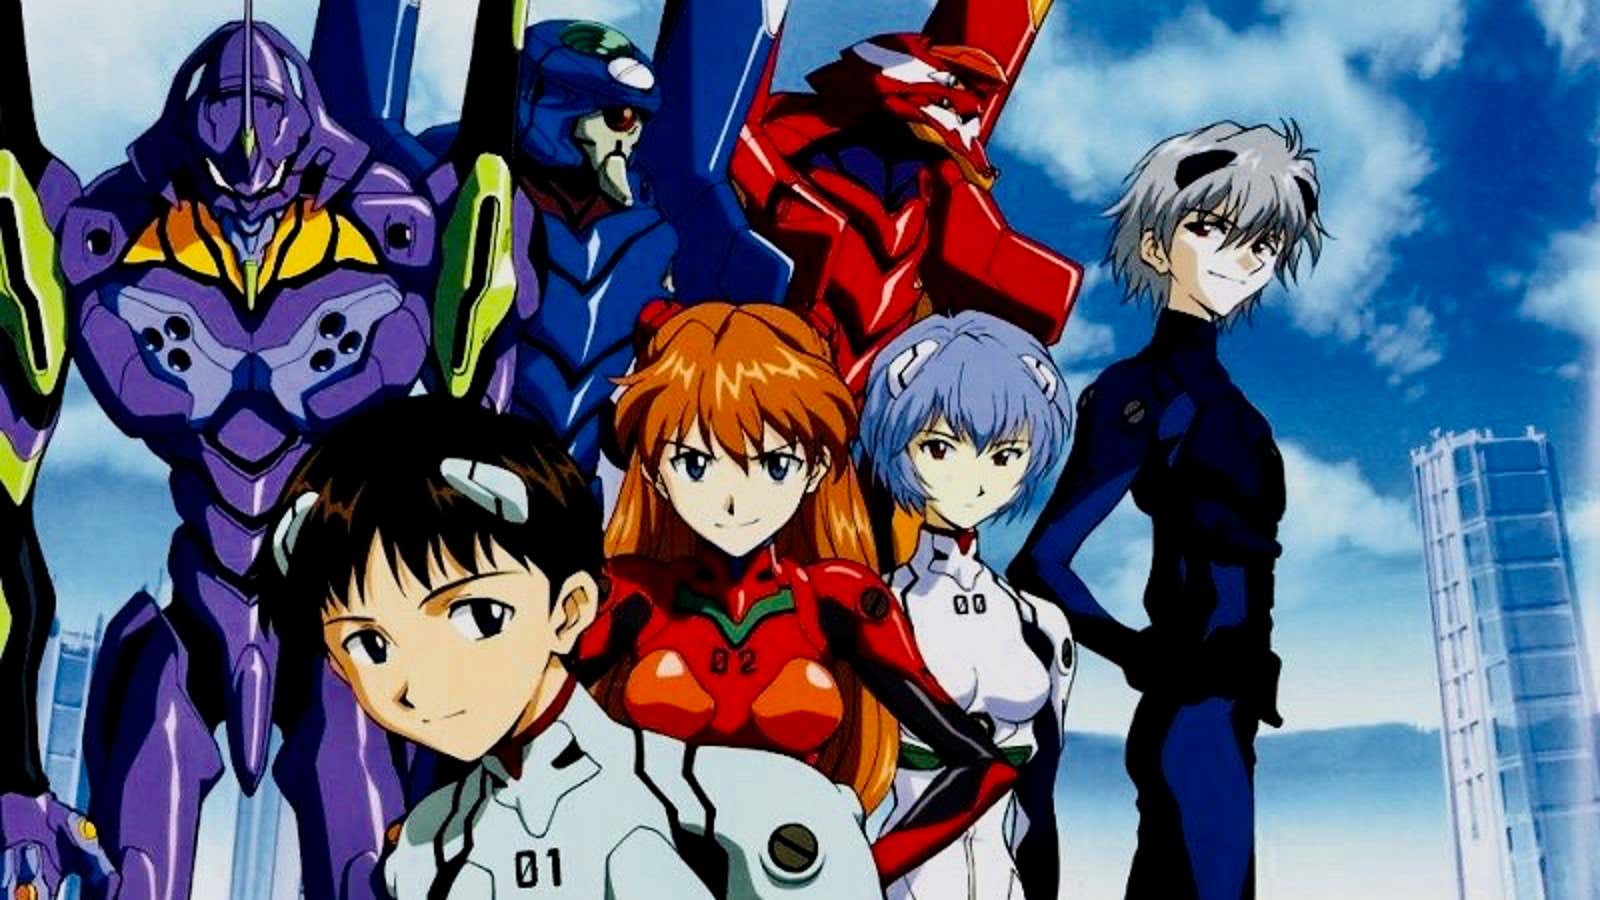 Neon Genesis Evangelion" anime on Netflix reflects our lives